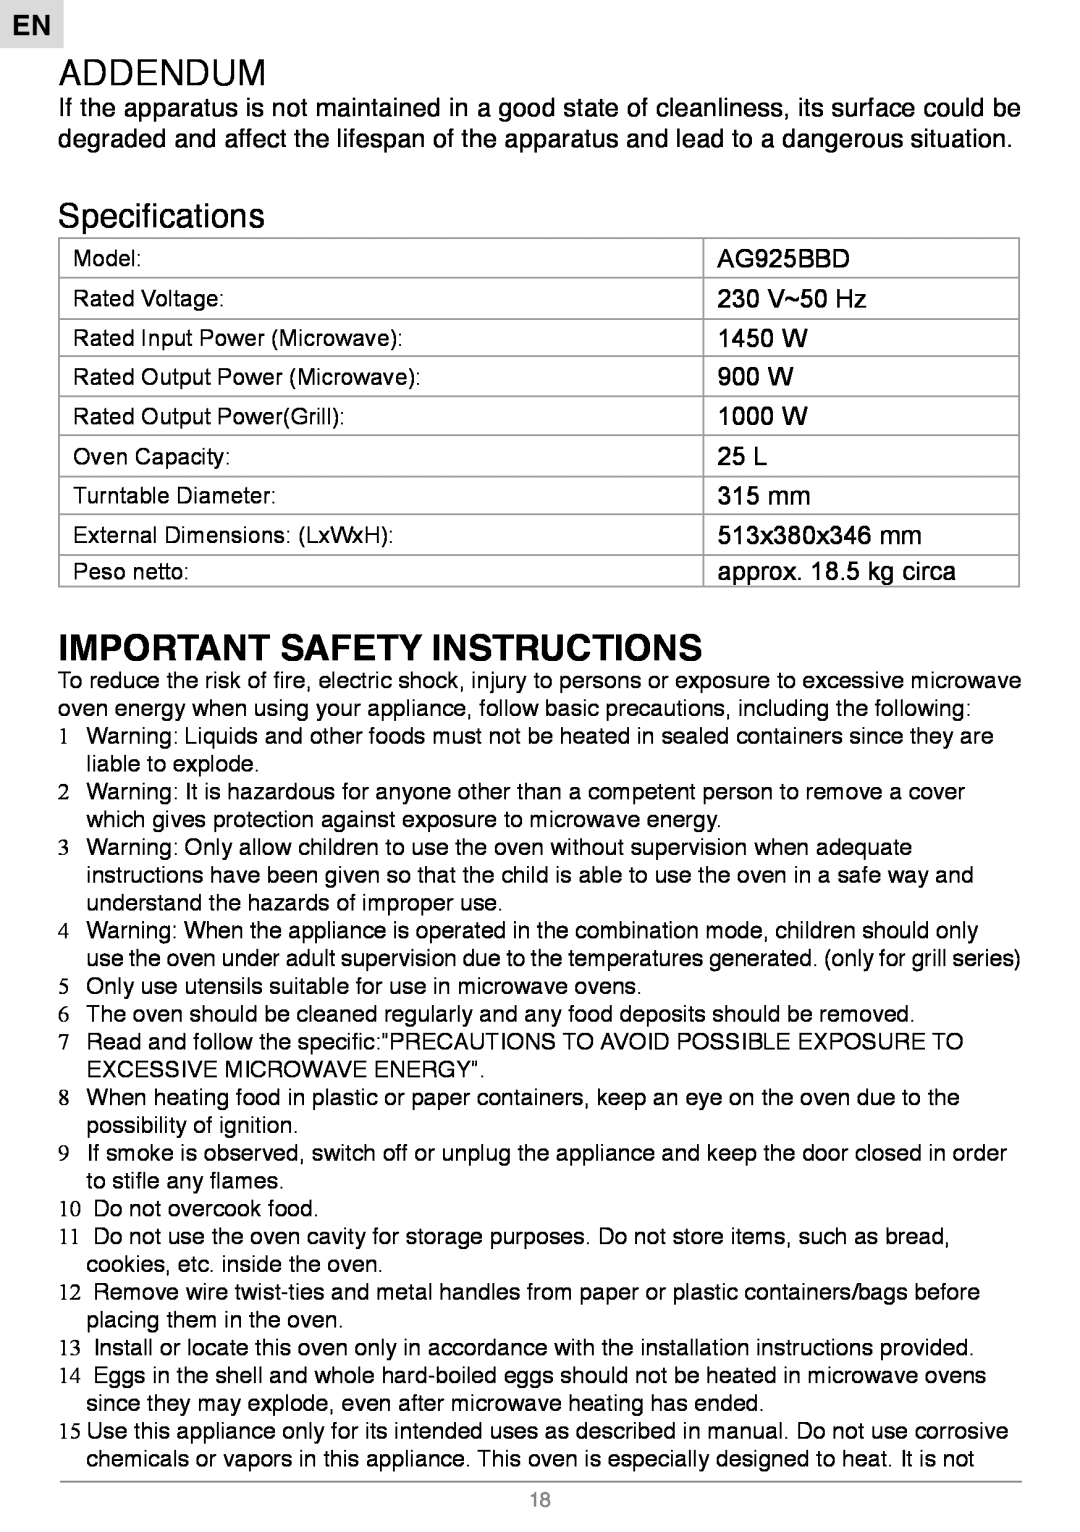 Foster S1000 Important Safety Instructions, Specifications, AG925BBD, 230 V~50 Hz, 1450 W, 900 W, 1000 W, 25 L, 315 mm 